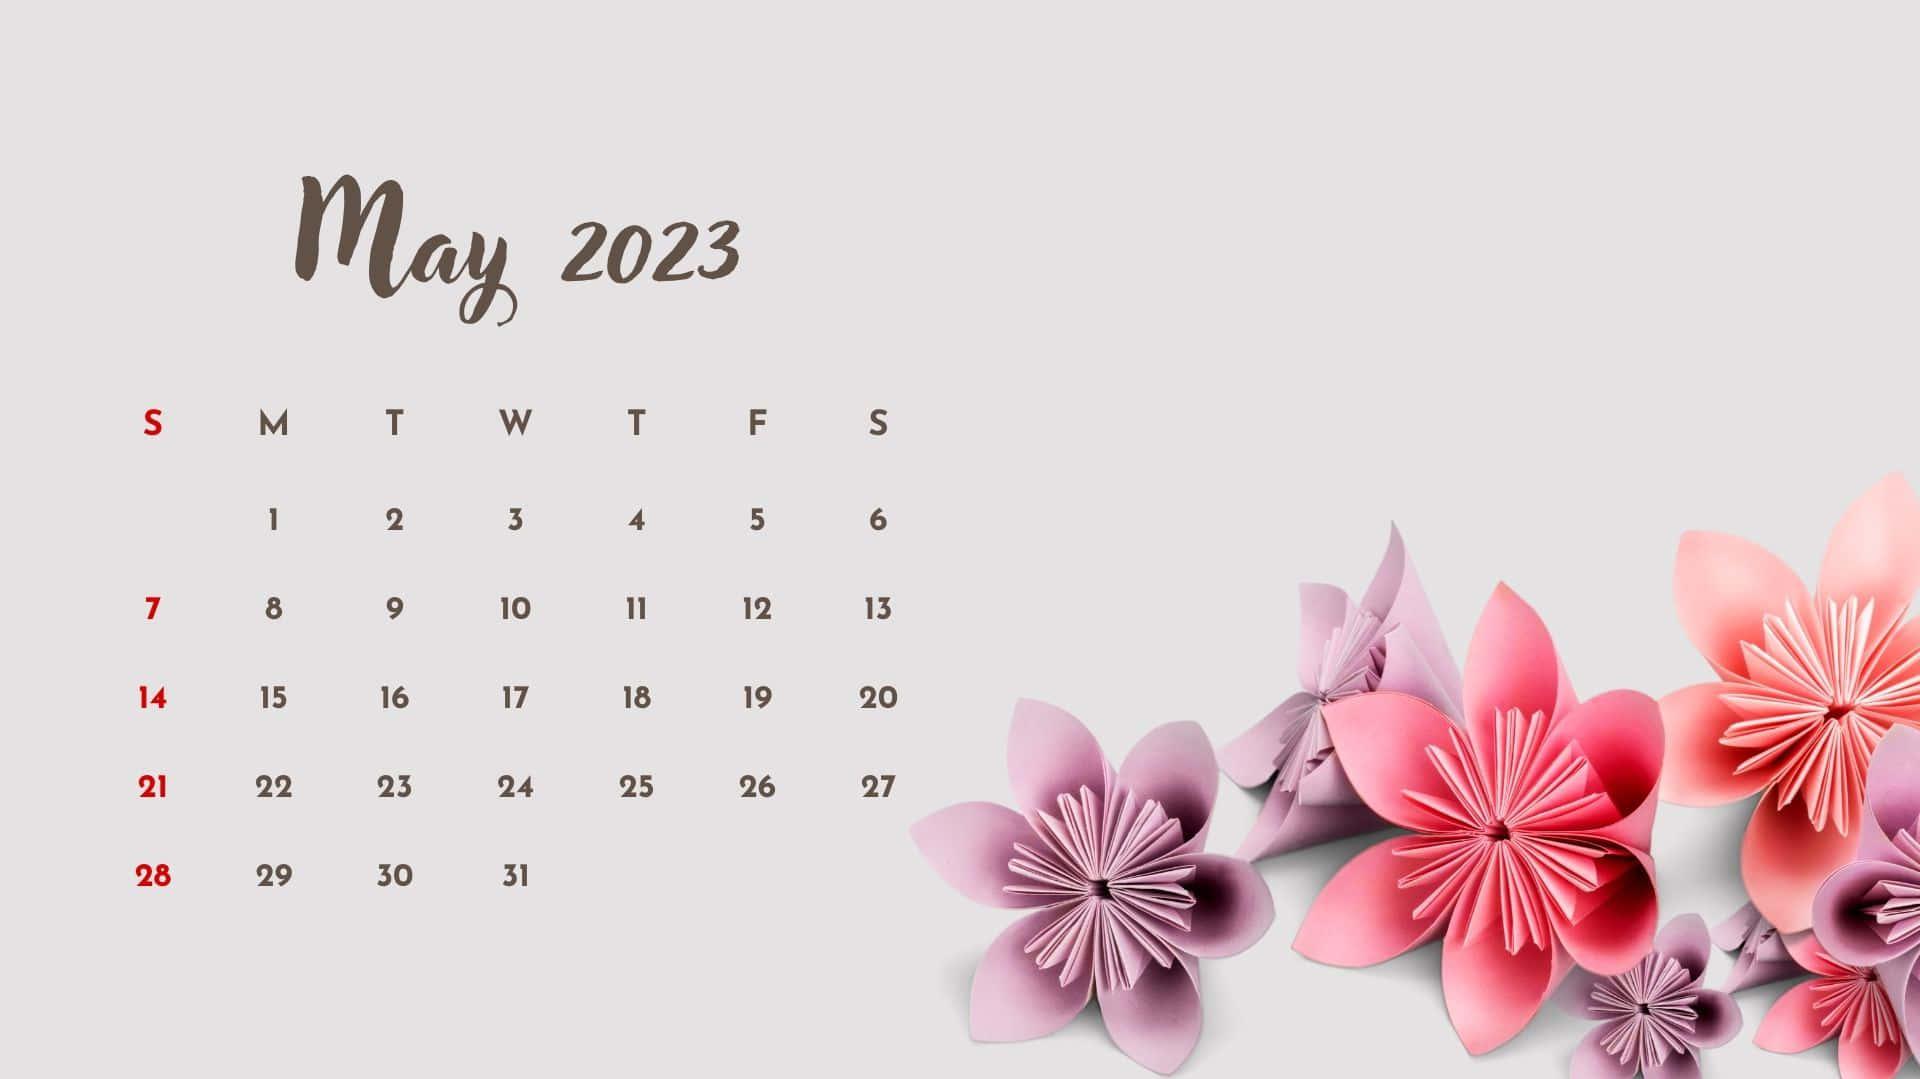 Download A Calendar With Pink Flowers On It Wallpaper